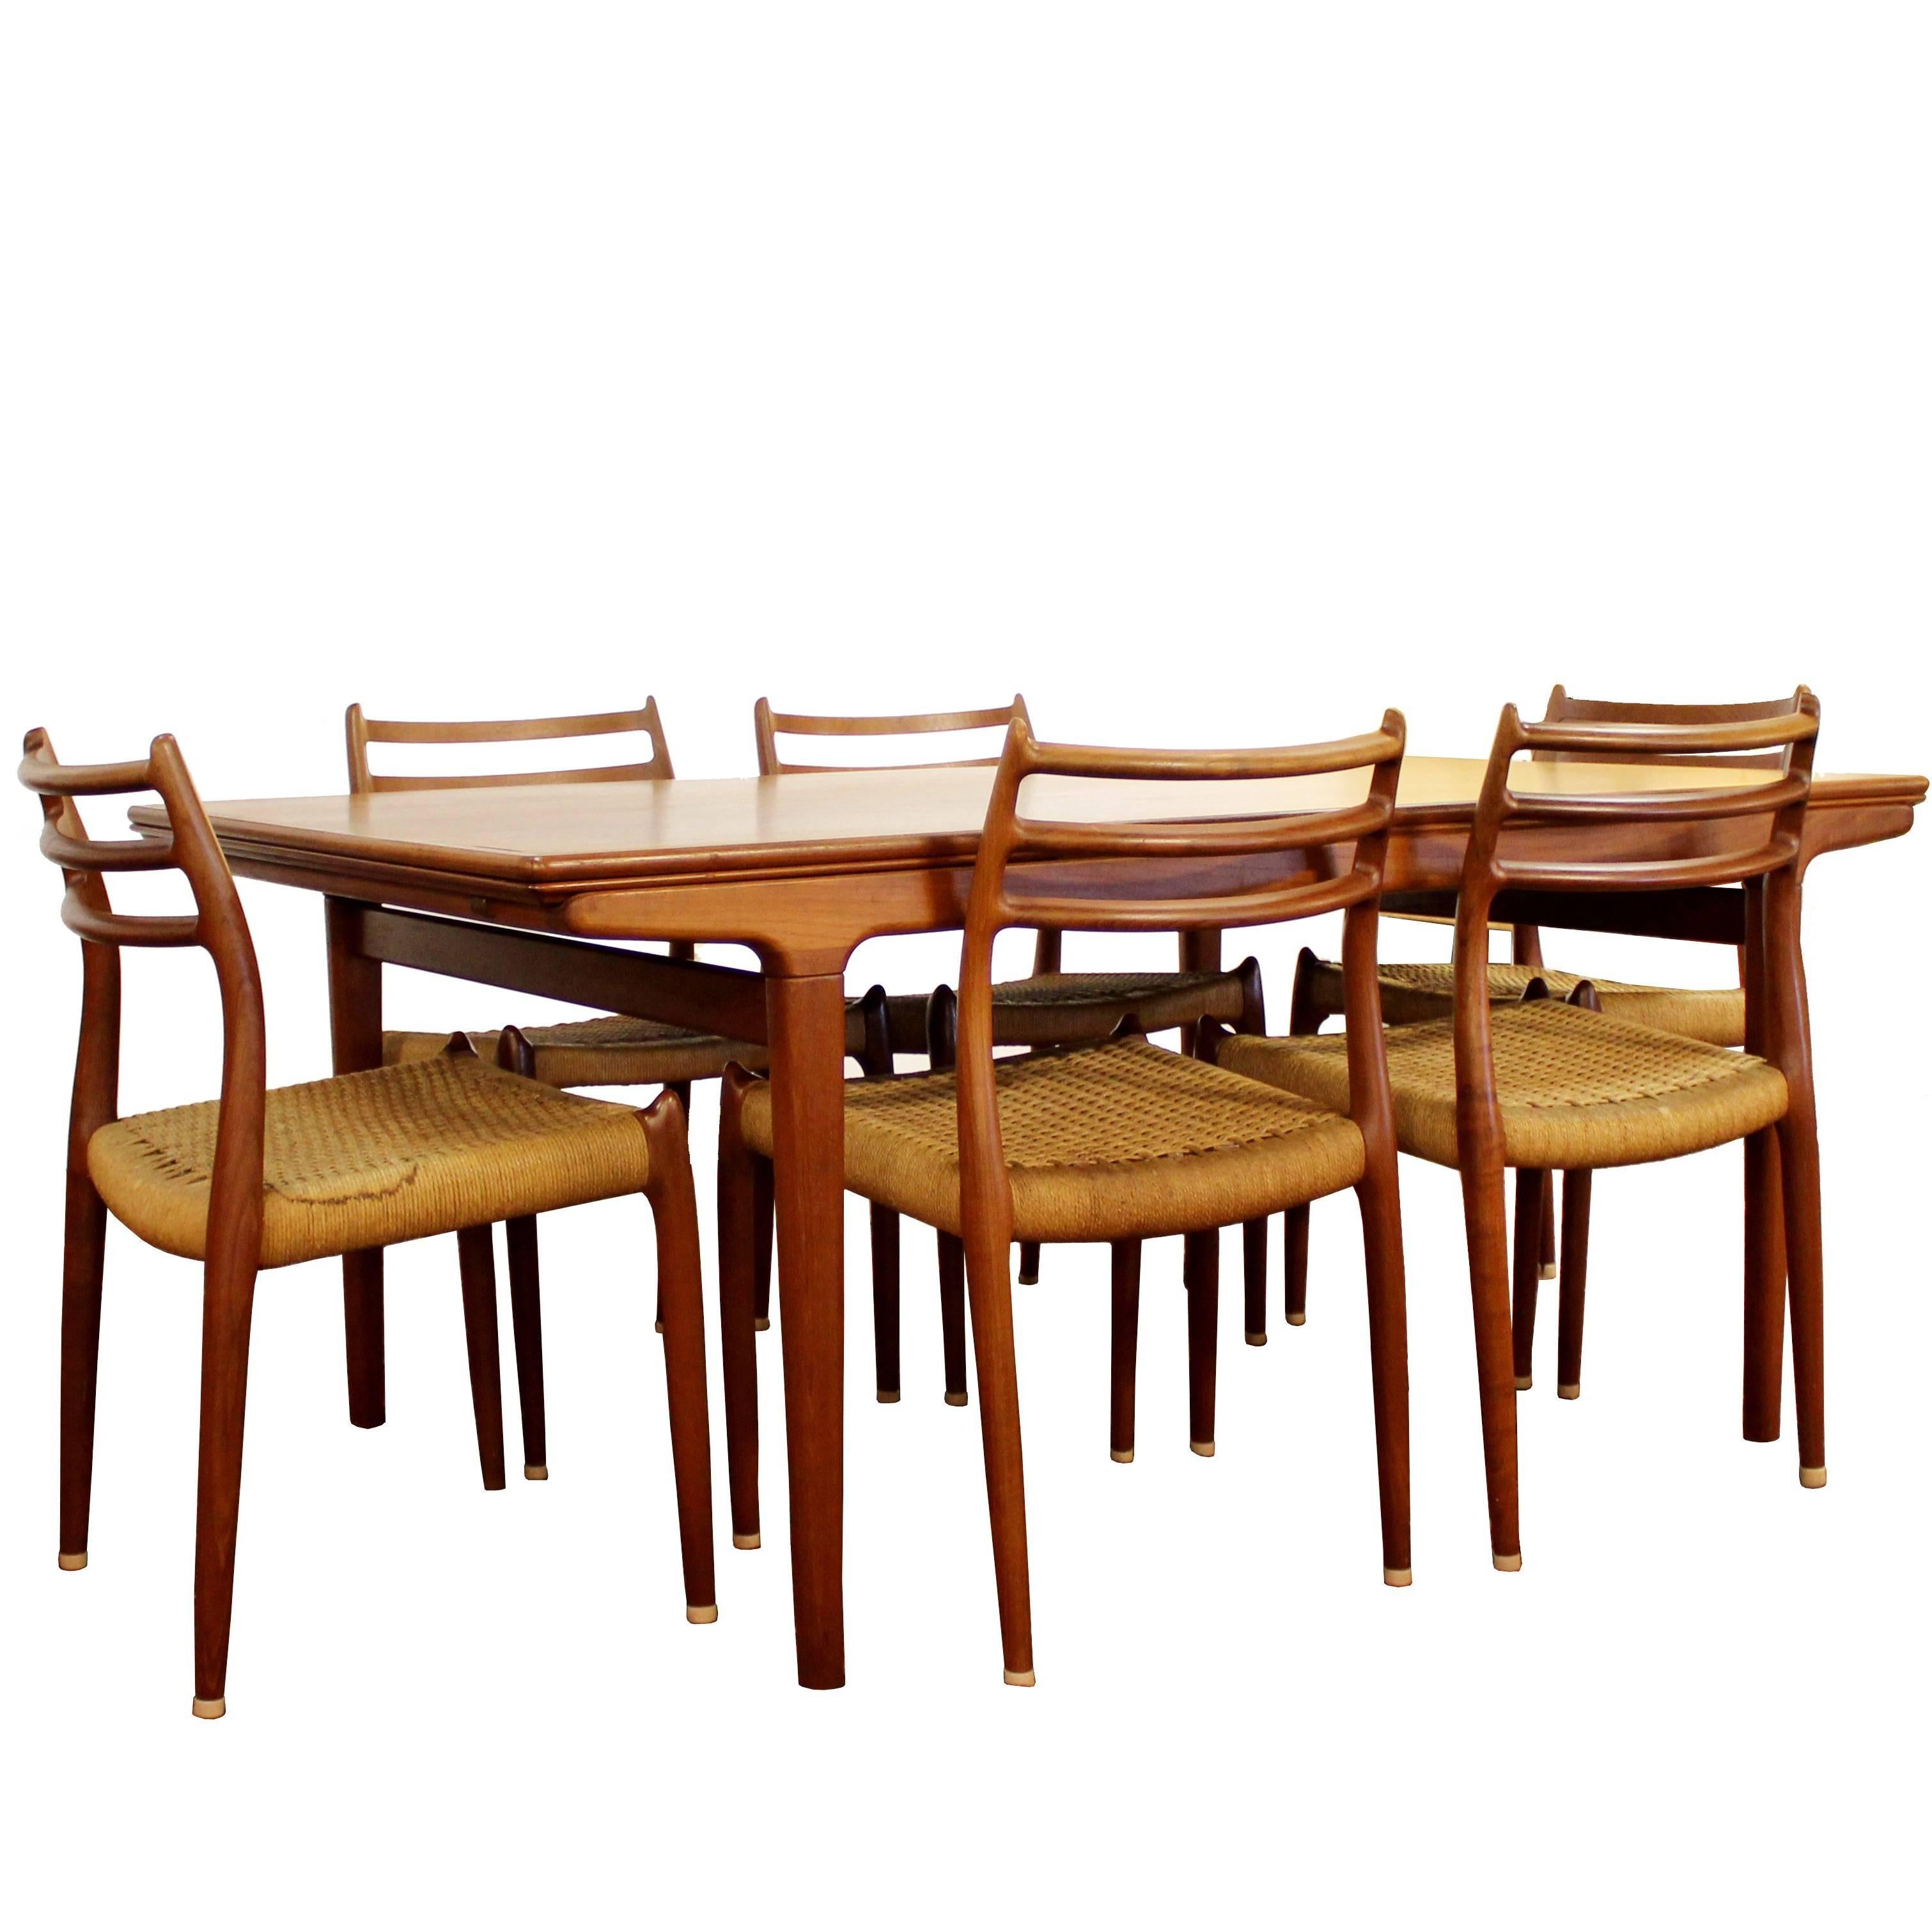 Mid-Century Modern Danish Teak Expandable Dining Table Six Chairs Two Leaves